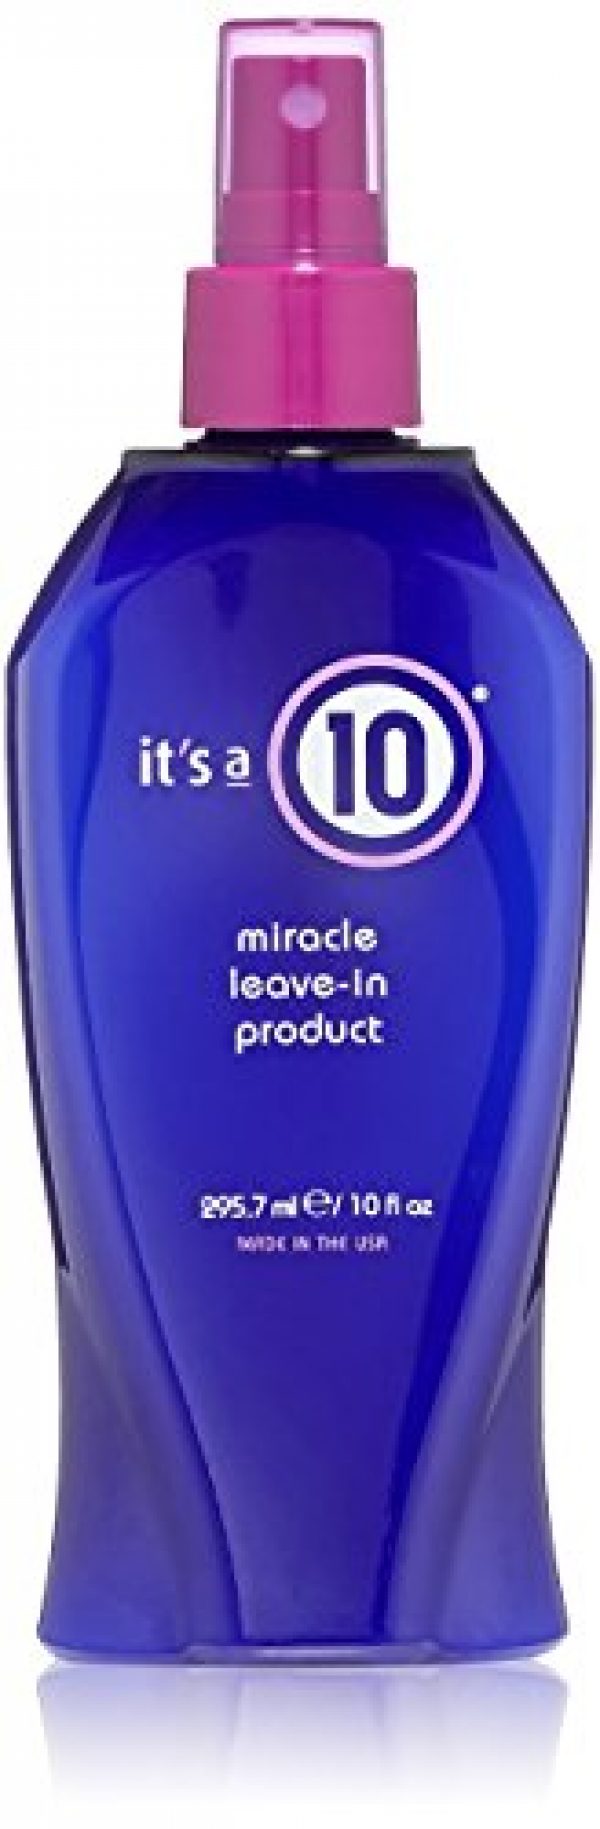 It's A 10 Haircare Miracle Leave-In Conditioner Spray - 10 oz. - 1ct 7